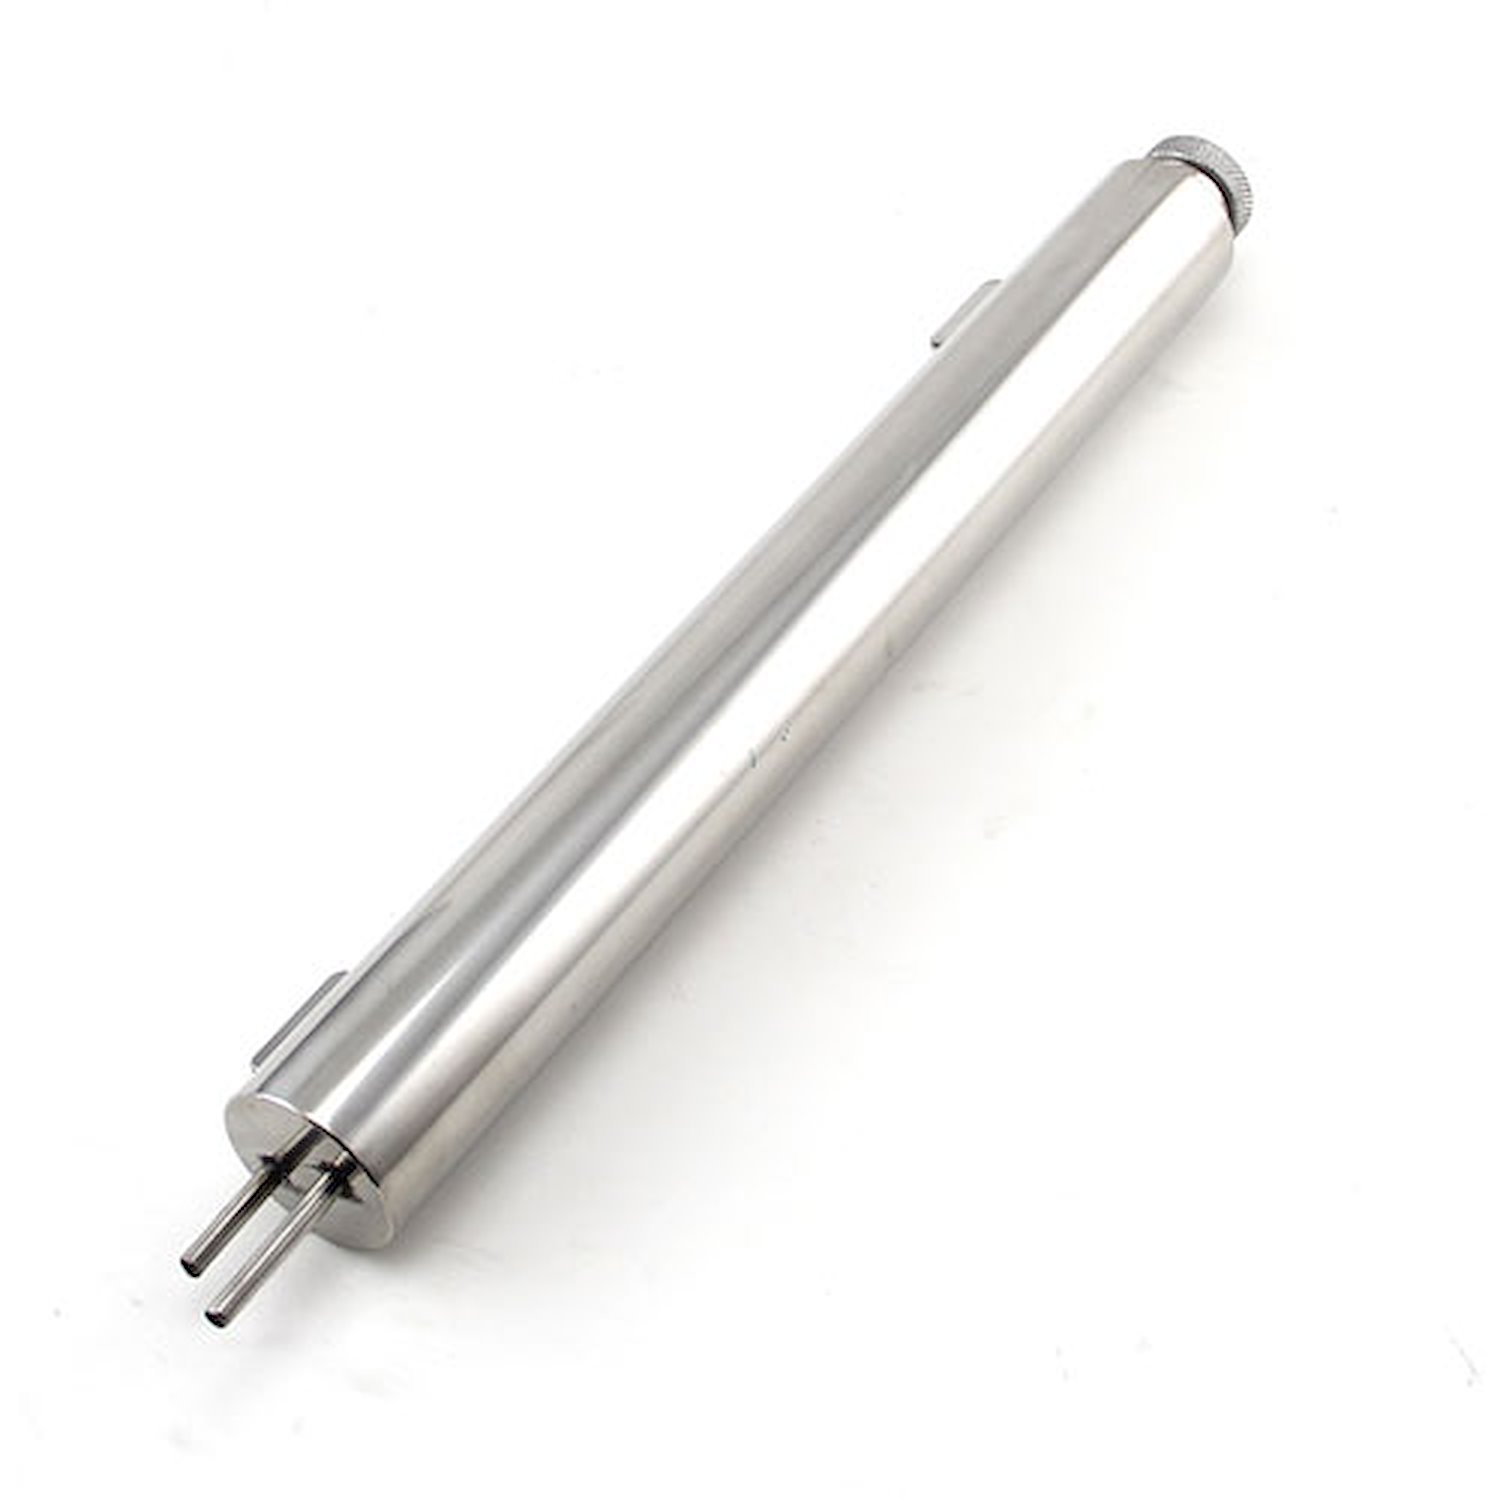 2 x 19 Stainless Steel Overflow Tank With Mounting Bracket Kit